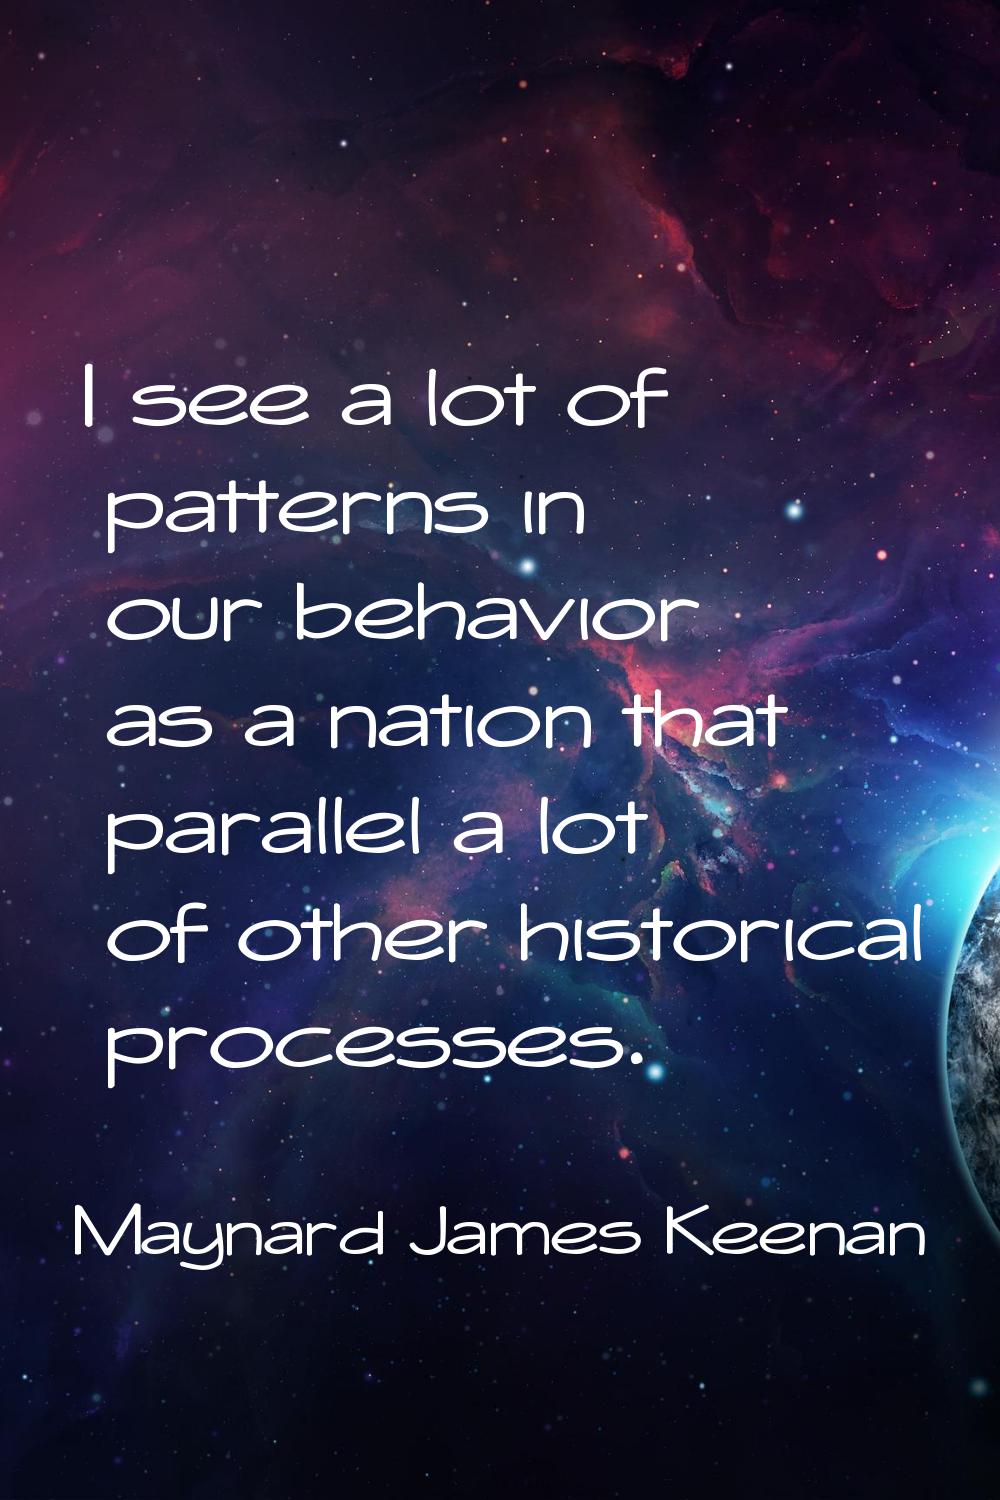 I see a lot of patterns in our behavior as a nation that parallel a lot of other historical process